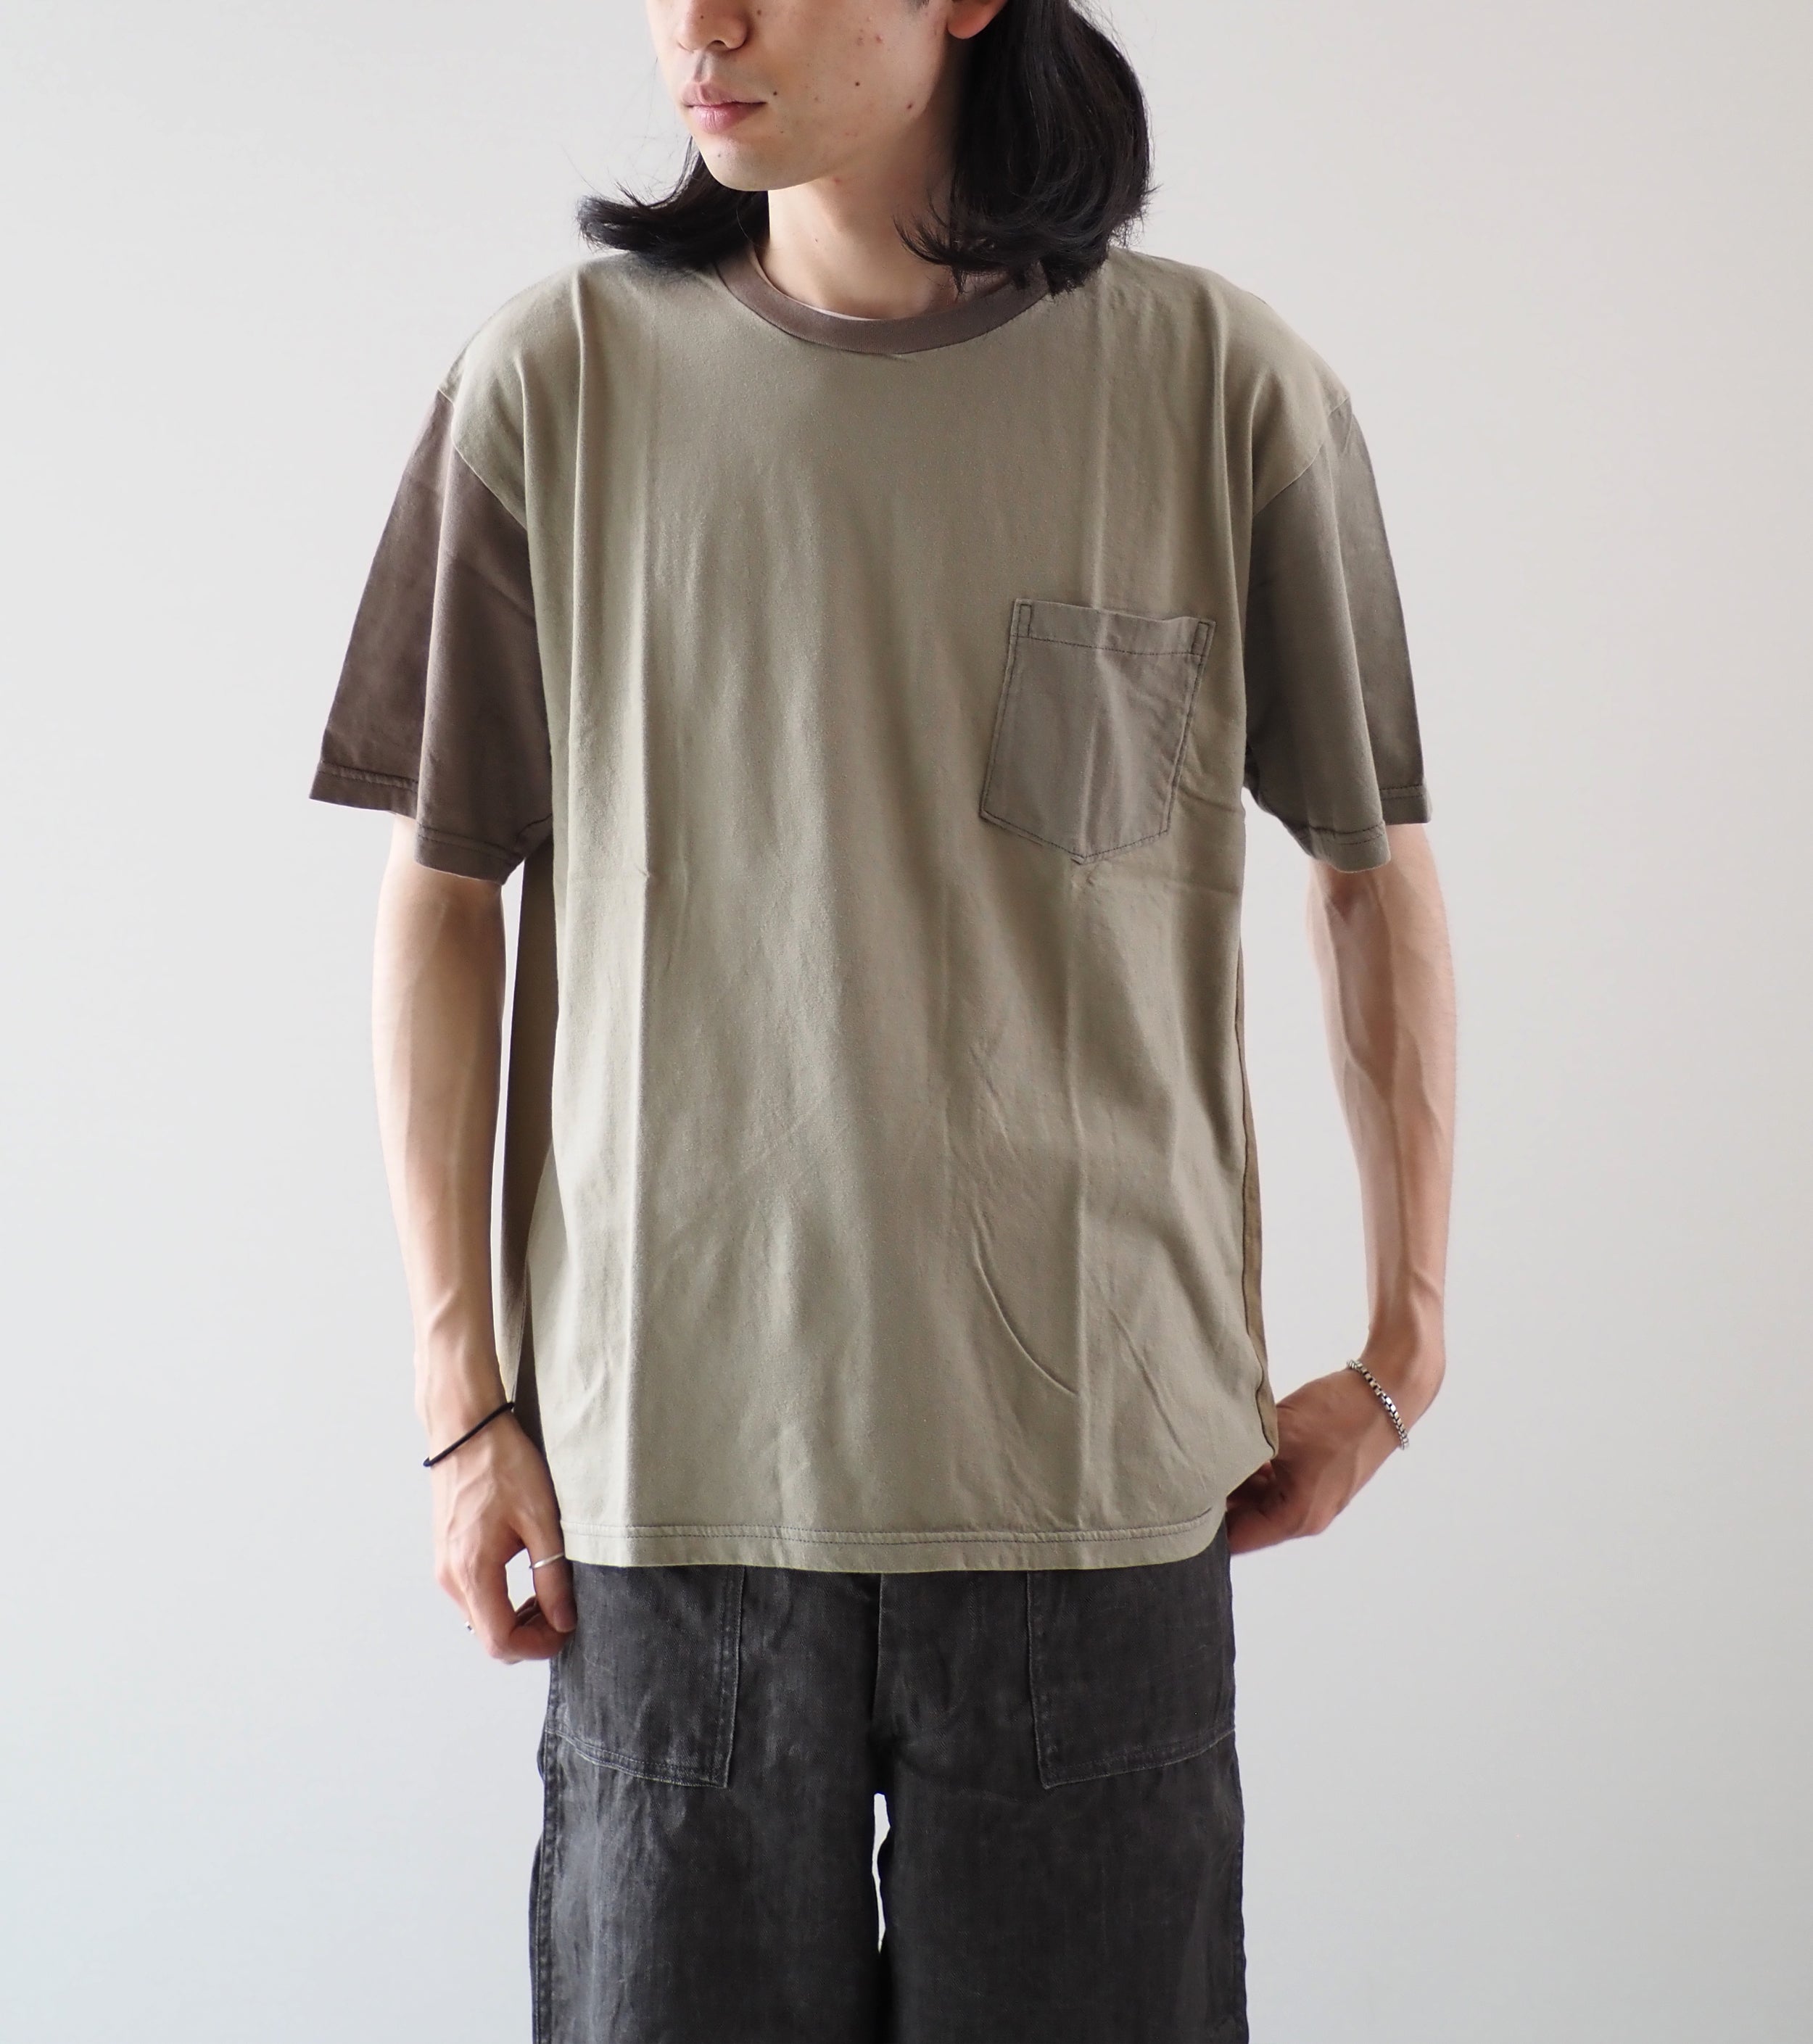 Orslow 4トーン ポケット ティーシャツ , Army Green